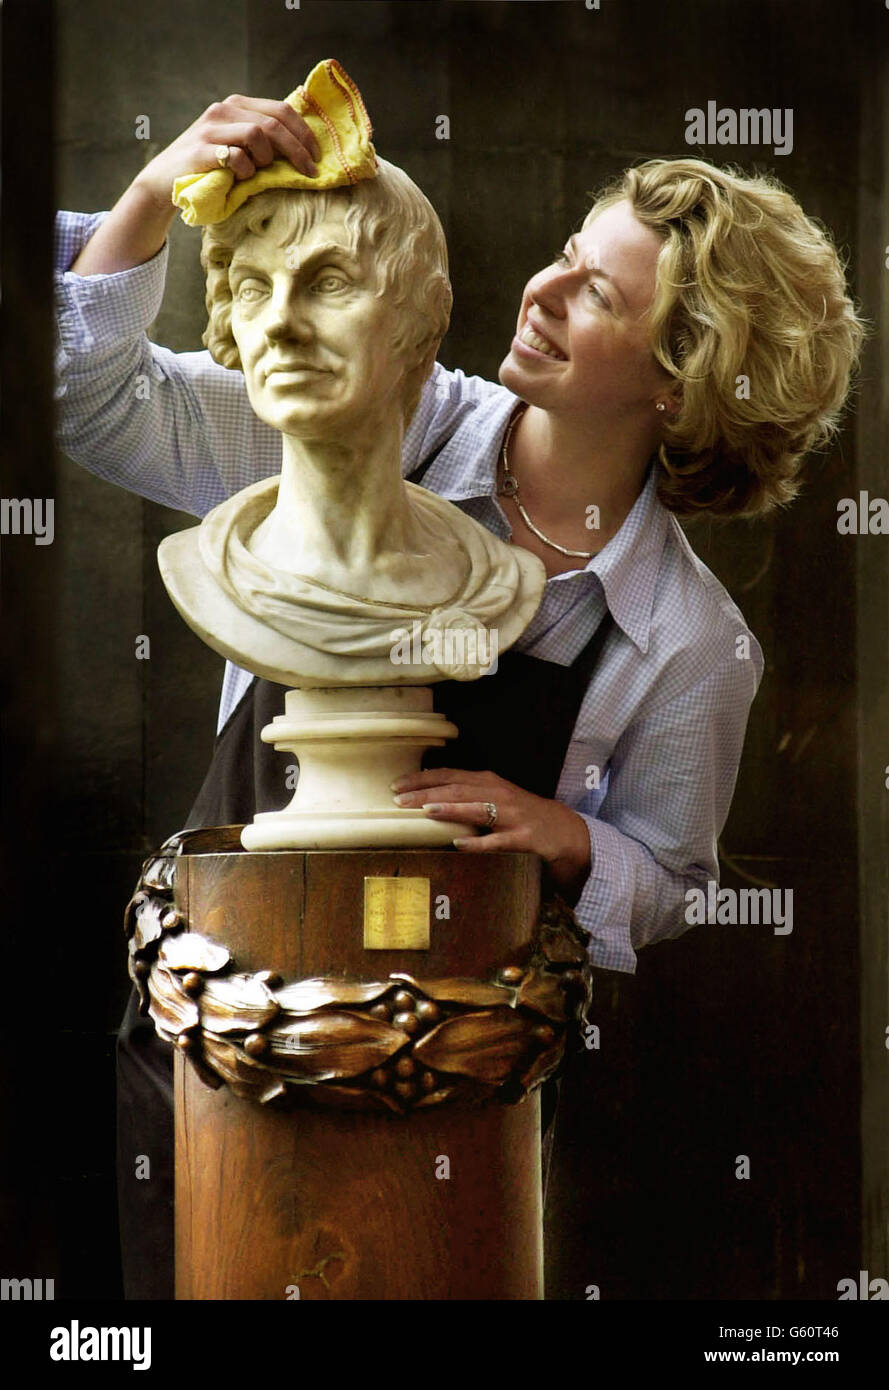 Joanna Frain-Bell from the Scottish auction house Lyon & Turnbull mops Nelson's brow before he goes under the hammer. One of Scotland`s oldest gentlemen's clubs, the Caledonian club, is saying farewell to its oldest member. * a bust of Horatio Nelson by Laurence Gahagan, dated 1806. It stands on an oak plinth with carved laurel wreath, made from the mast of Nelson's HMS Victory. The bust is expected to fetch 12,000 when it goes under the hammer at a Lyon & Turnbull auction in Edinburgh on the 28th September. Stock Photo